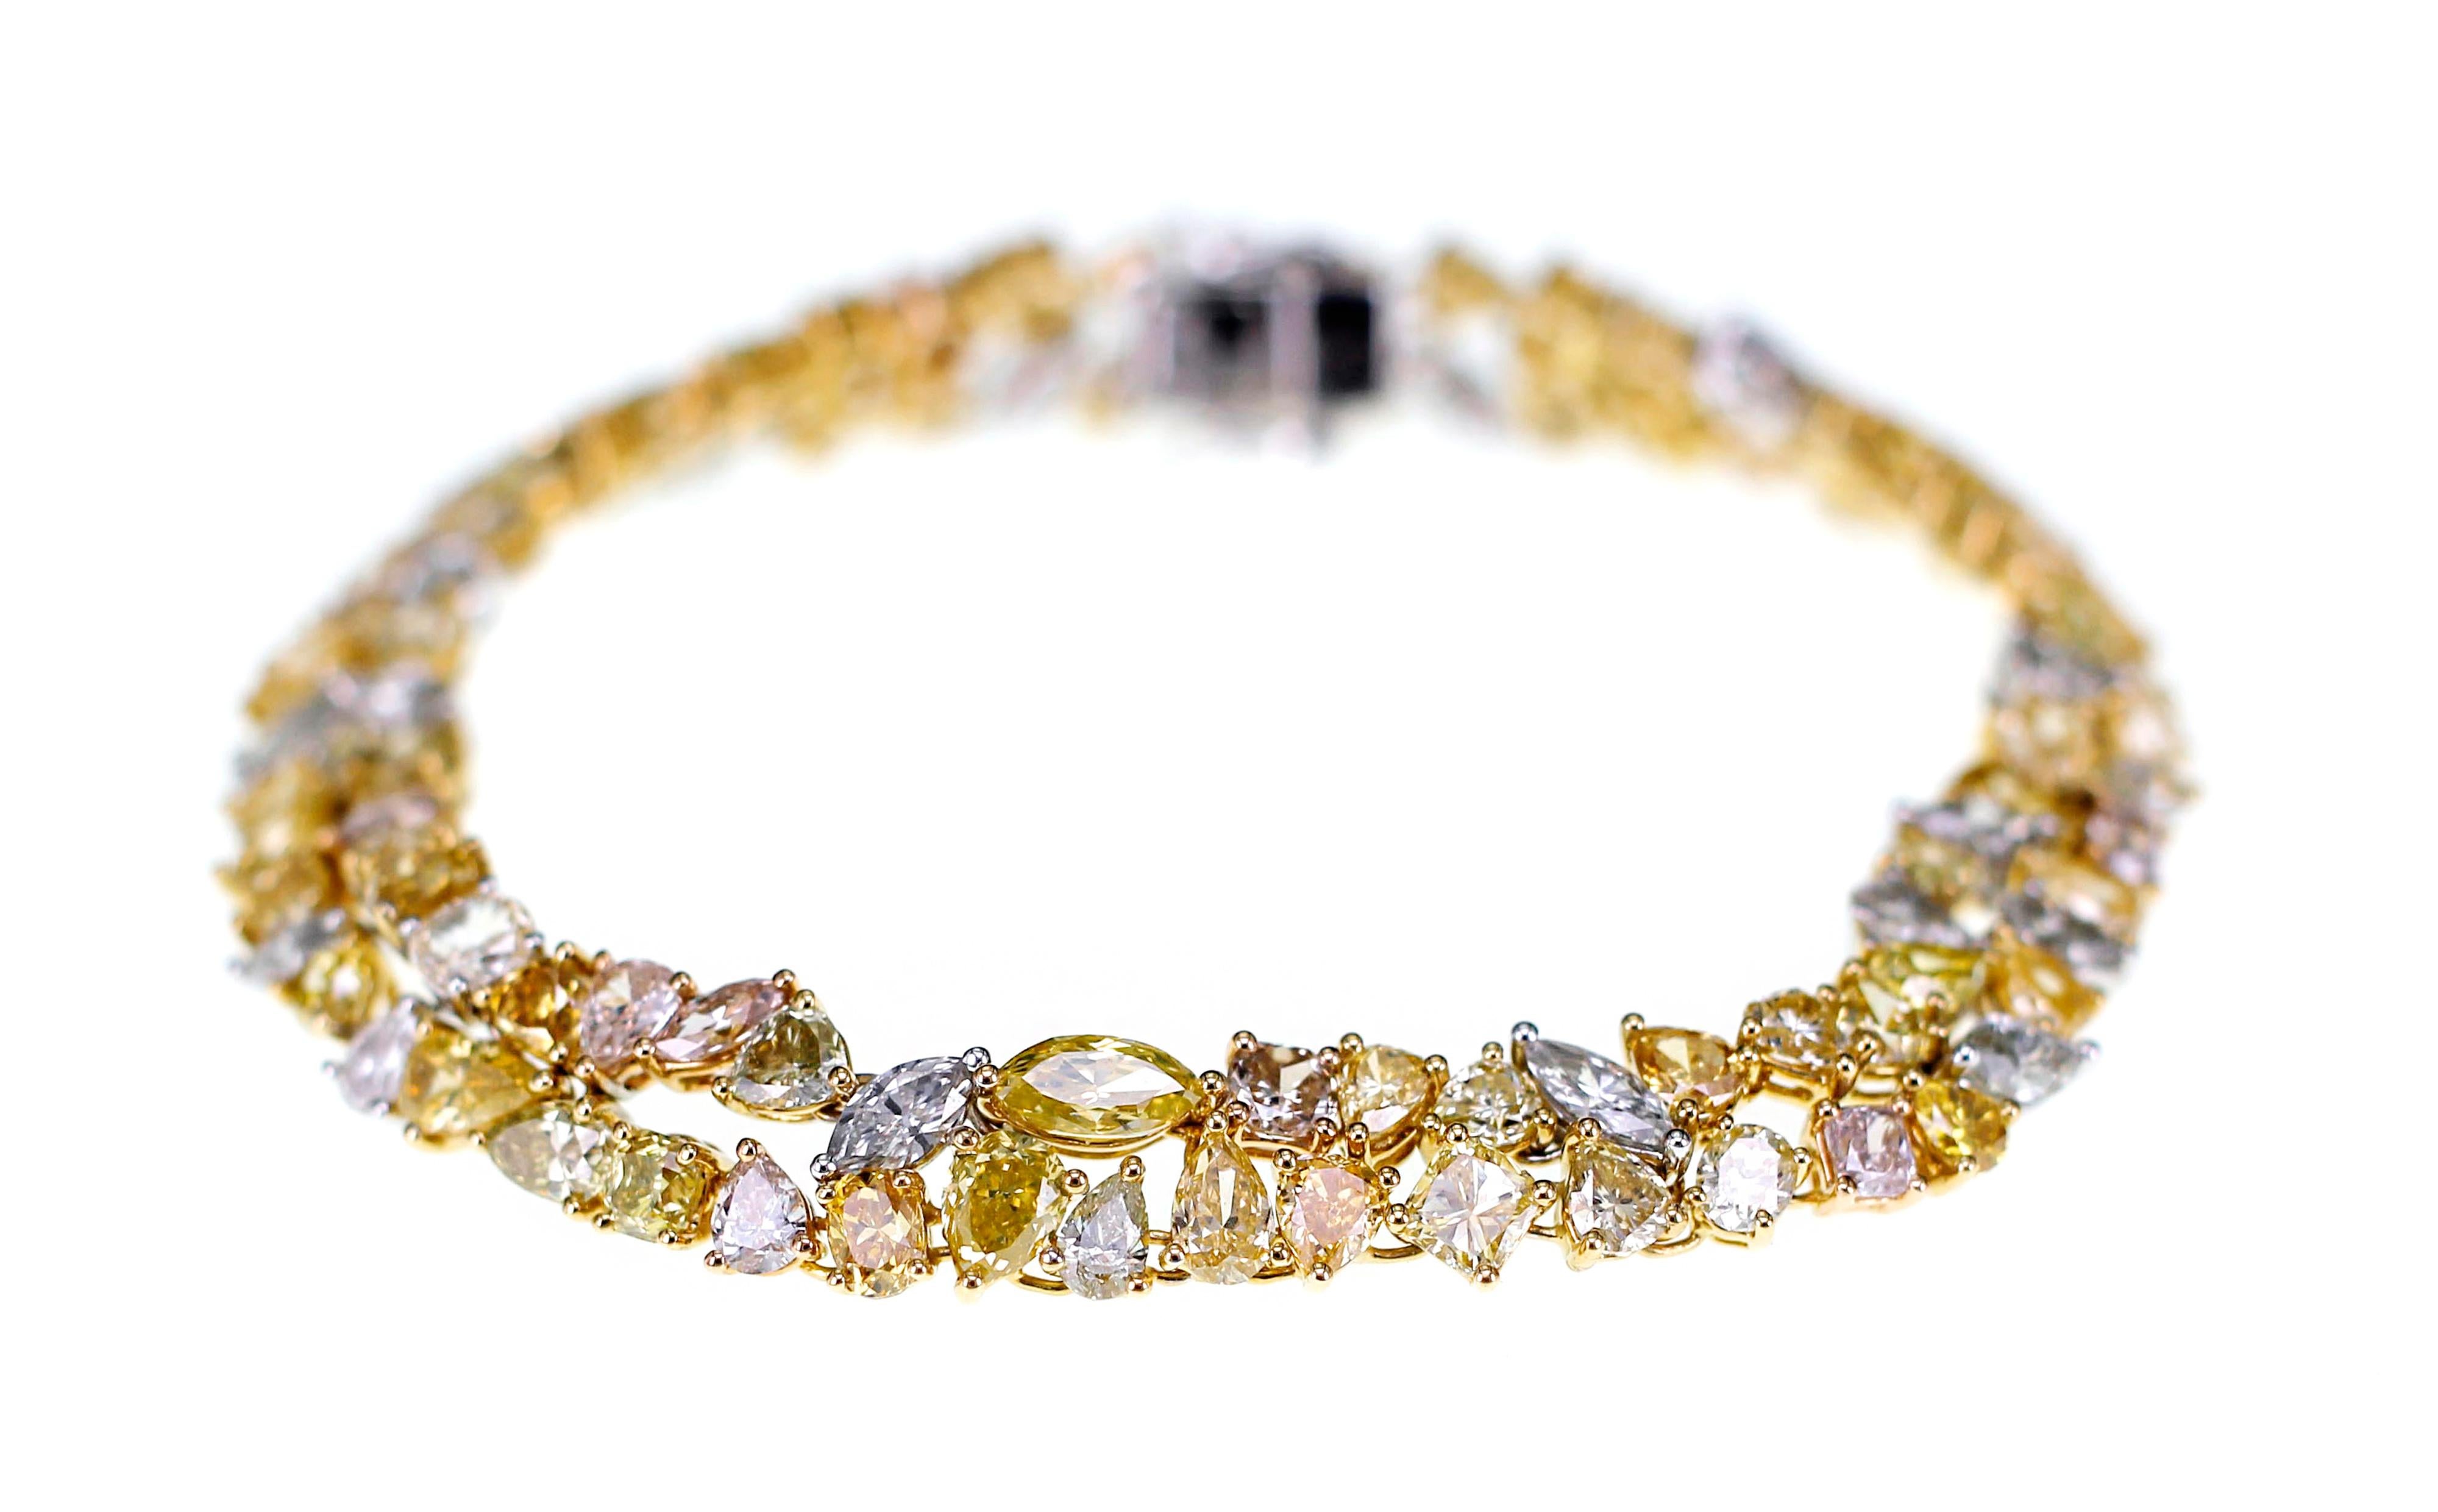 A total of 15.71 carat of natural fancy color diamonds are studded in this one of a kind bracelet. All the pieces of diamonds are individually set on the bracelet by hand. This hand made bracelet settles on your hand as if its made on custom order. 